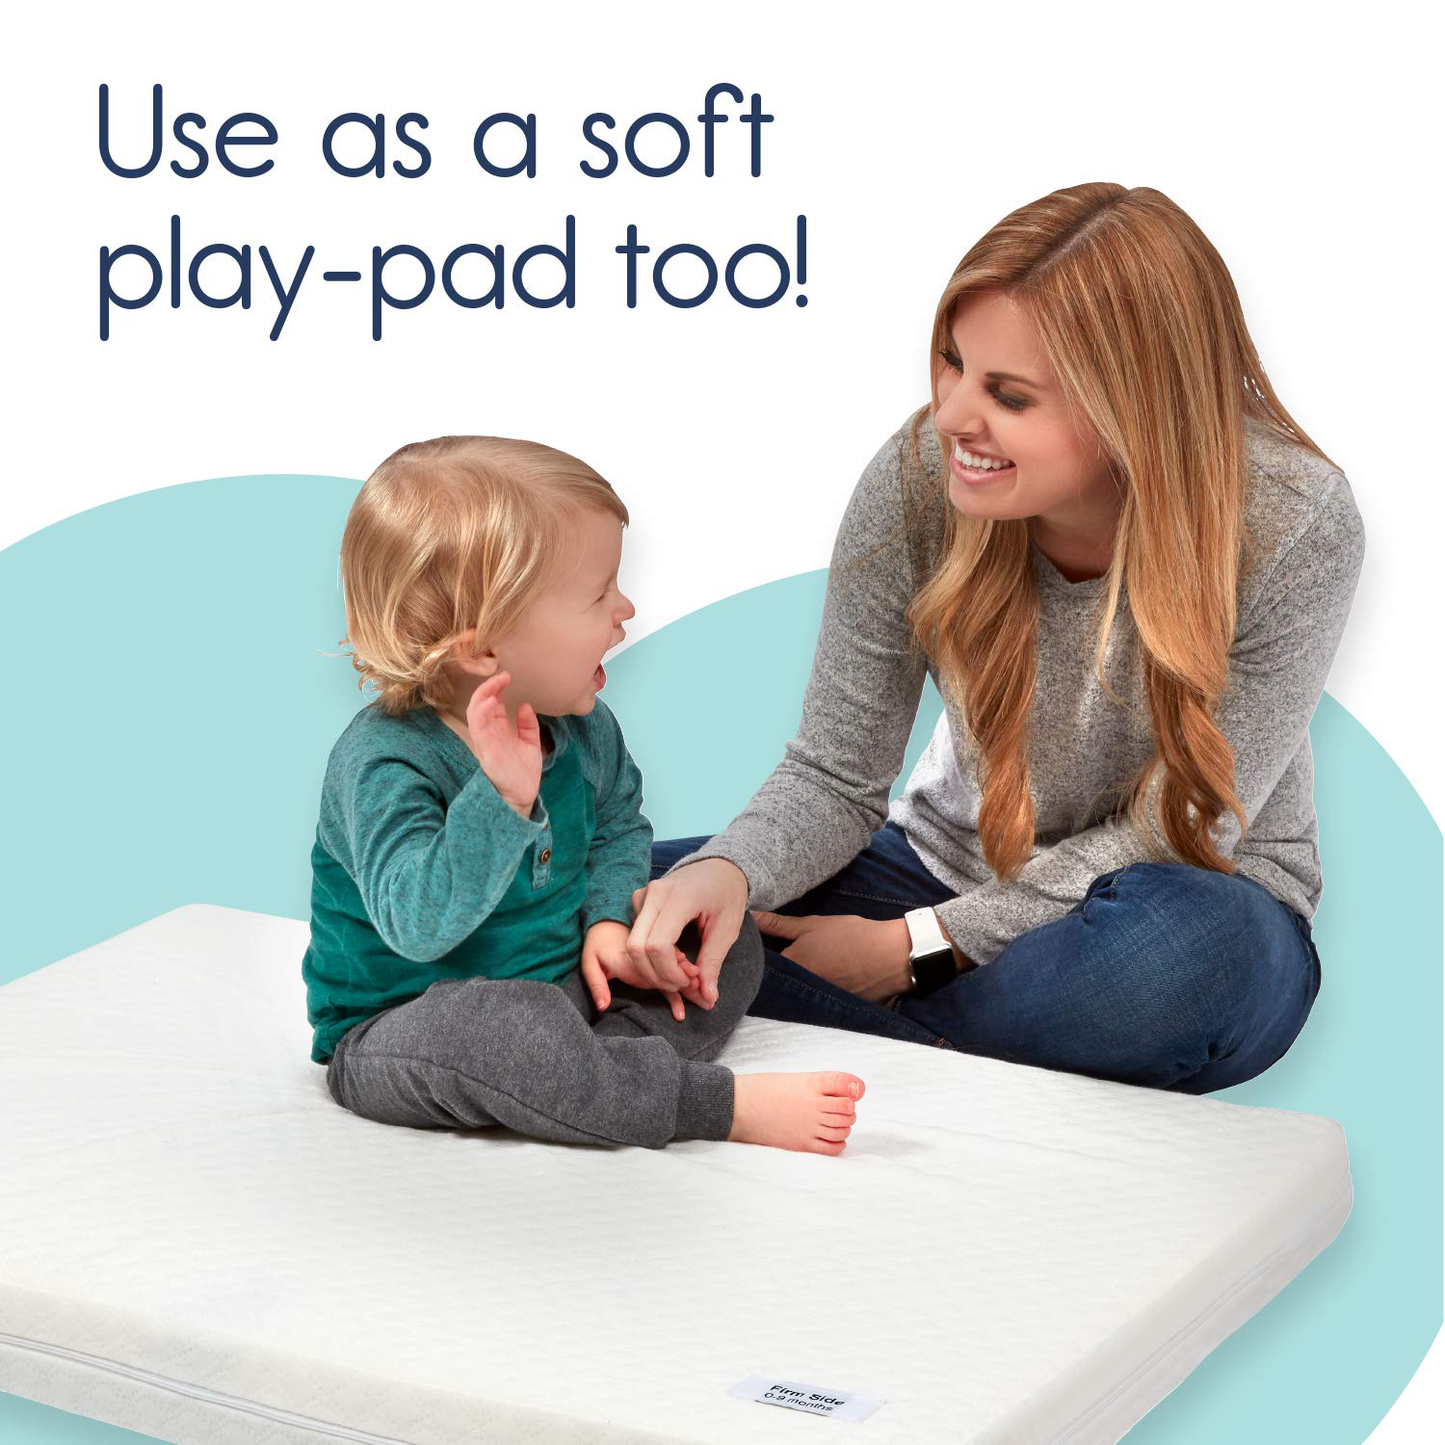 hiccapop Pack and Play Mattress Pad [Dual Sided] w/Firm Side (for Babies) & Soft Memory Foam Side (for Toddlers)